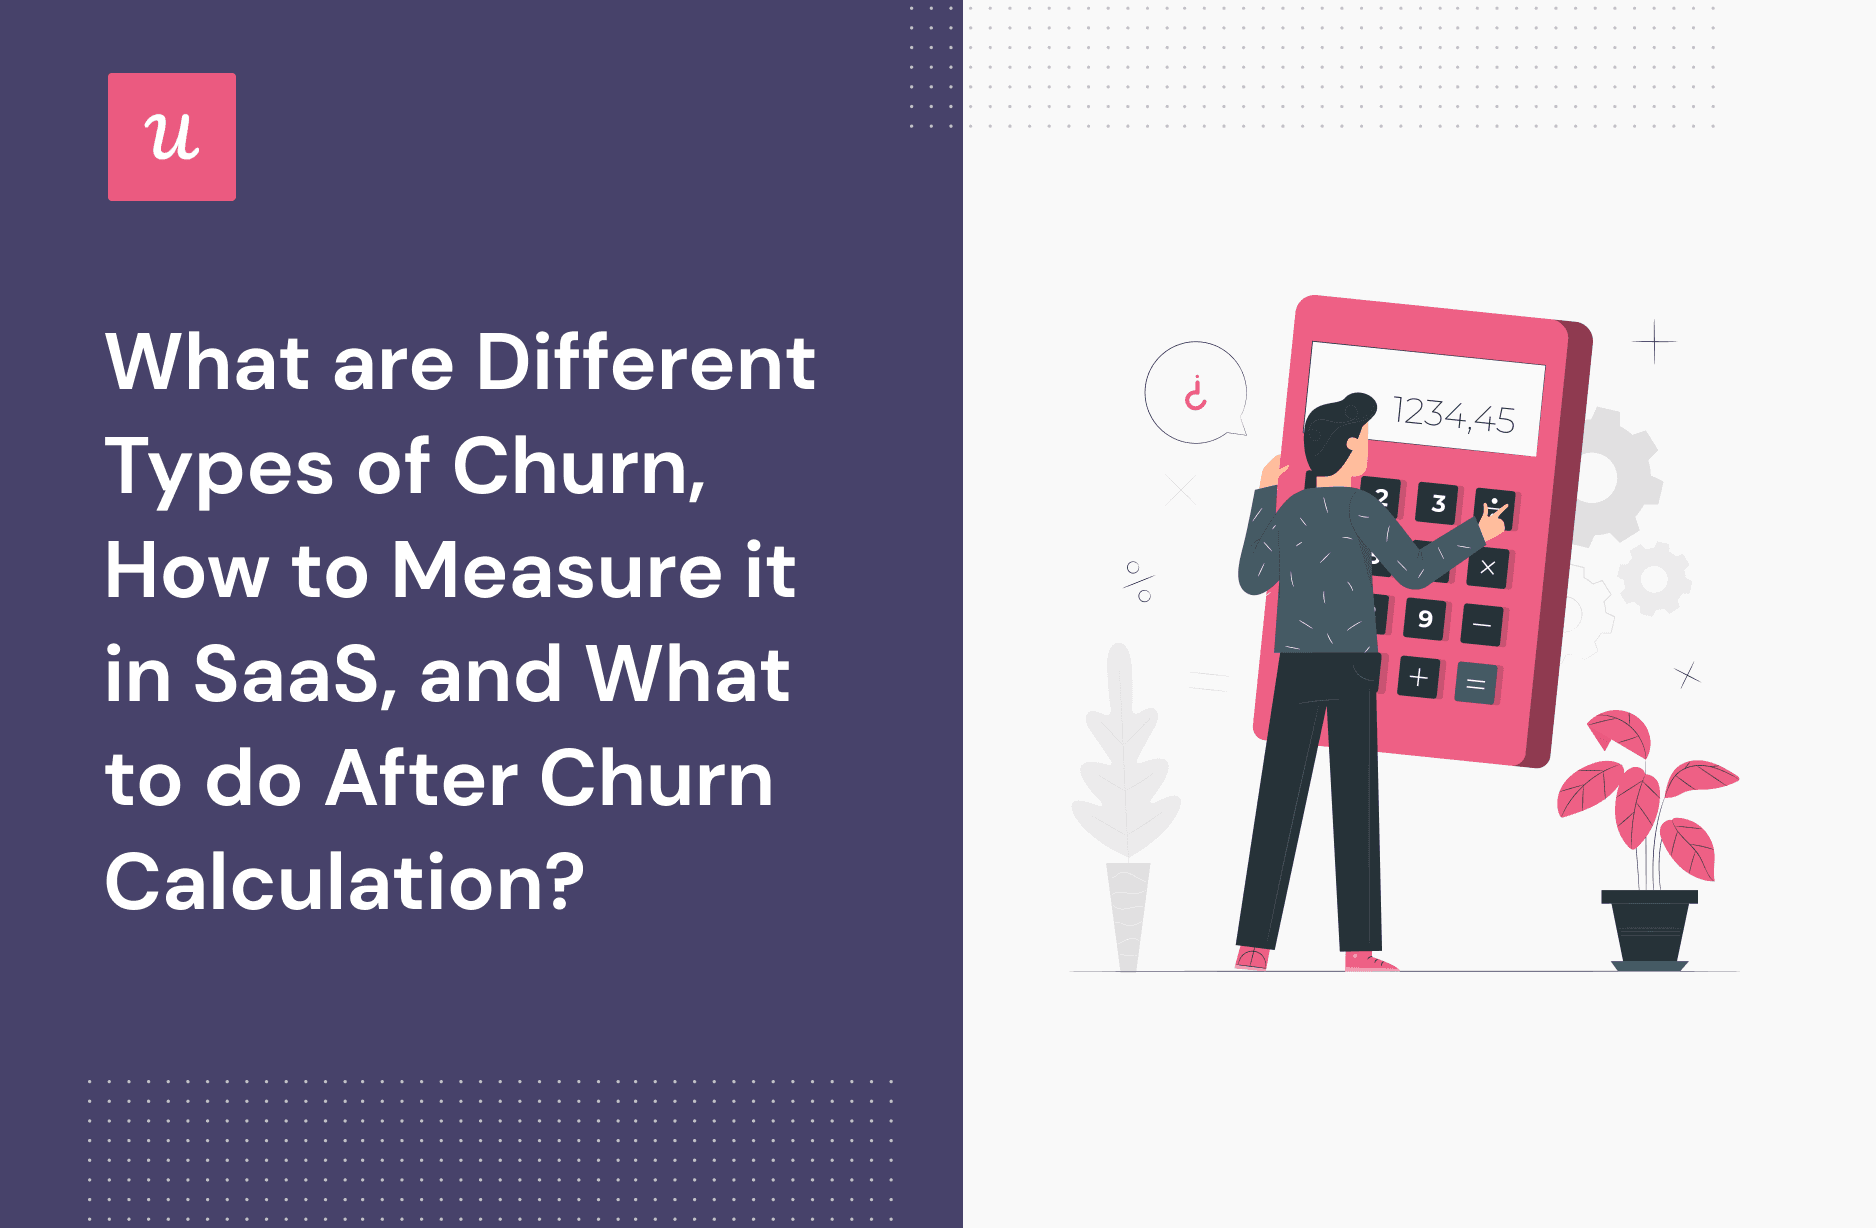 What Are Different Types of Churn, How To Measure It in SaaS, and What To Do After Churn Calculation?